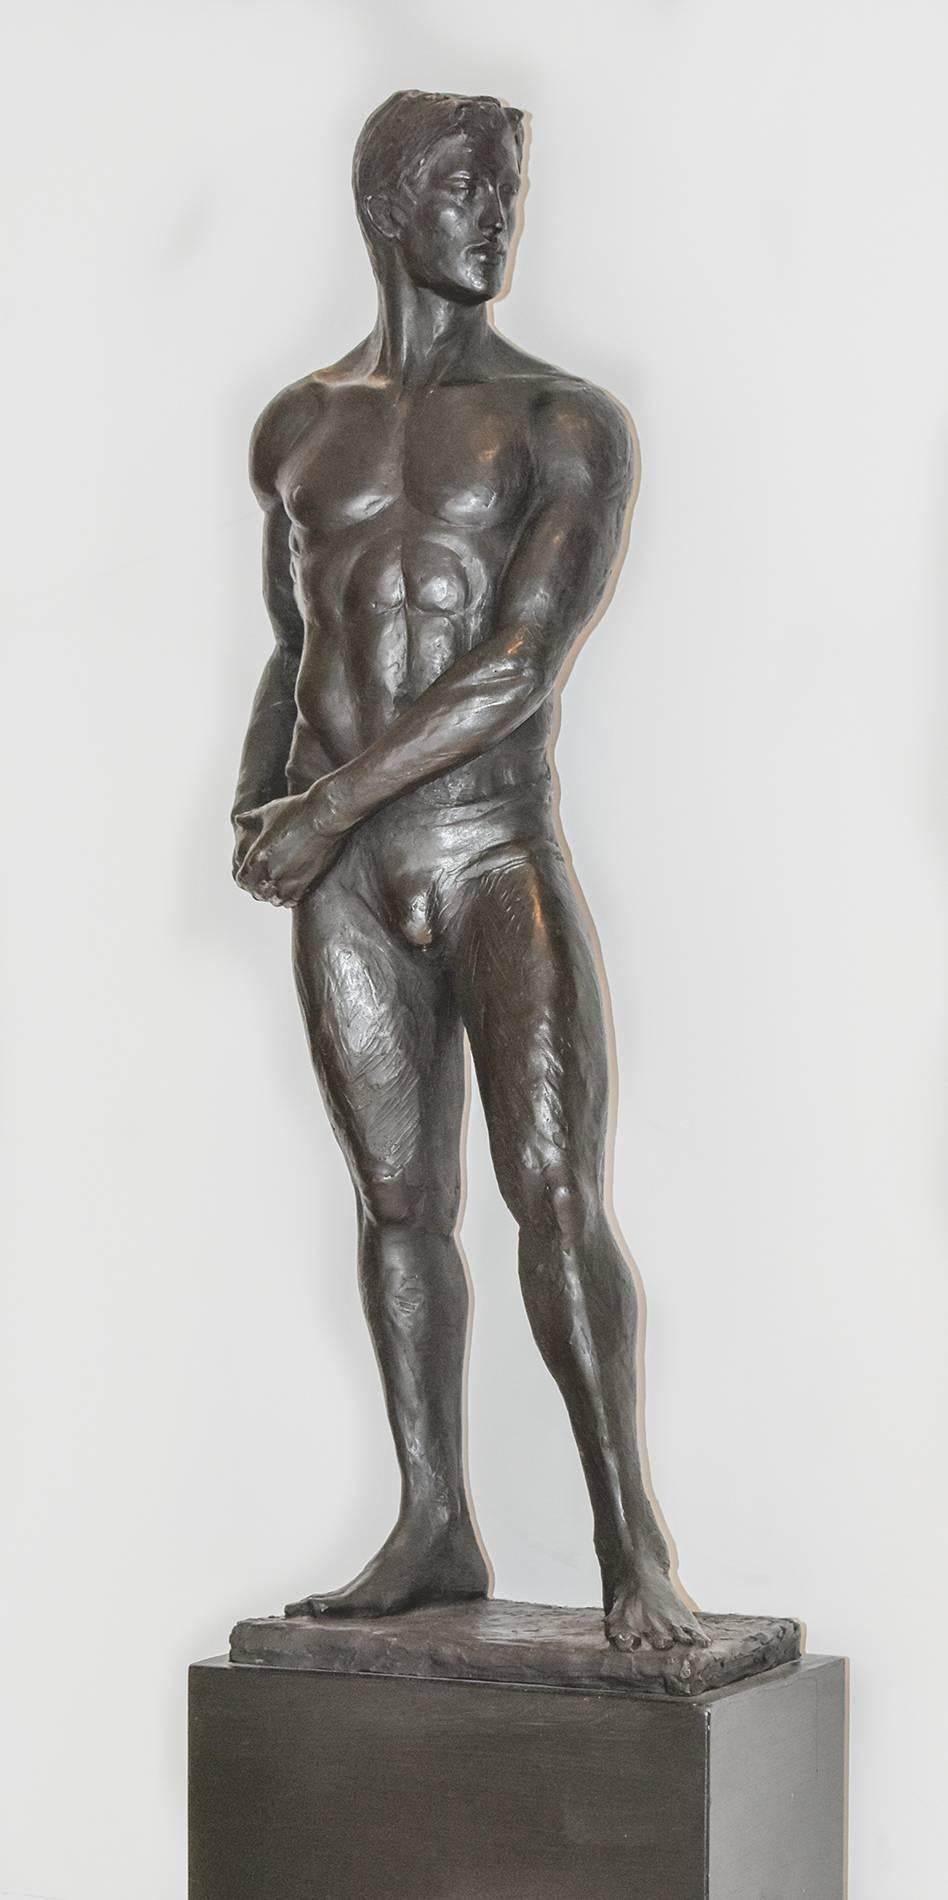 modern figurative bronze sculpture of a nude athlete 
29 x 9 x 5 inches
Base measures 11 x 11  7 inches

This figurative bronze sculpture was originally made as a study for the larger than life sized sculptures commissioned by the artist for the